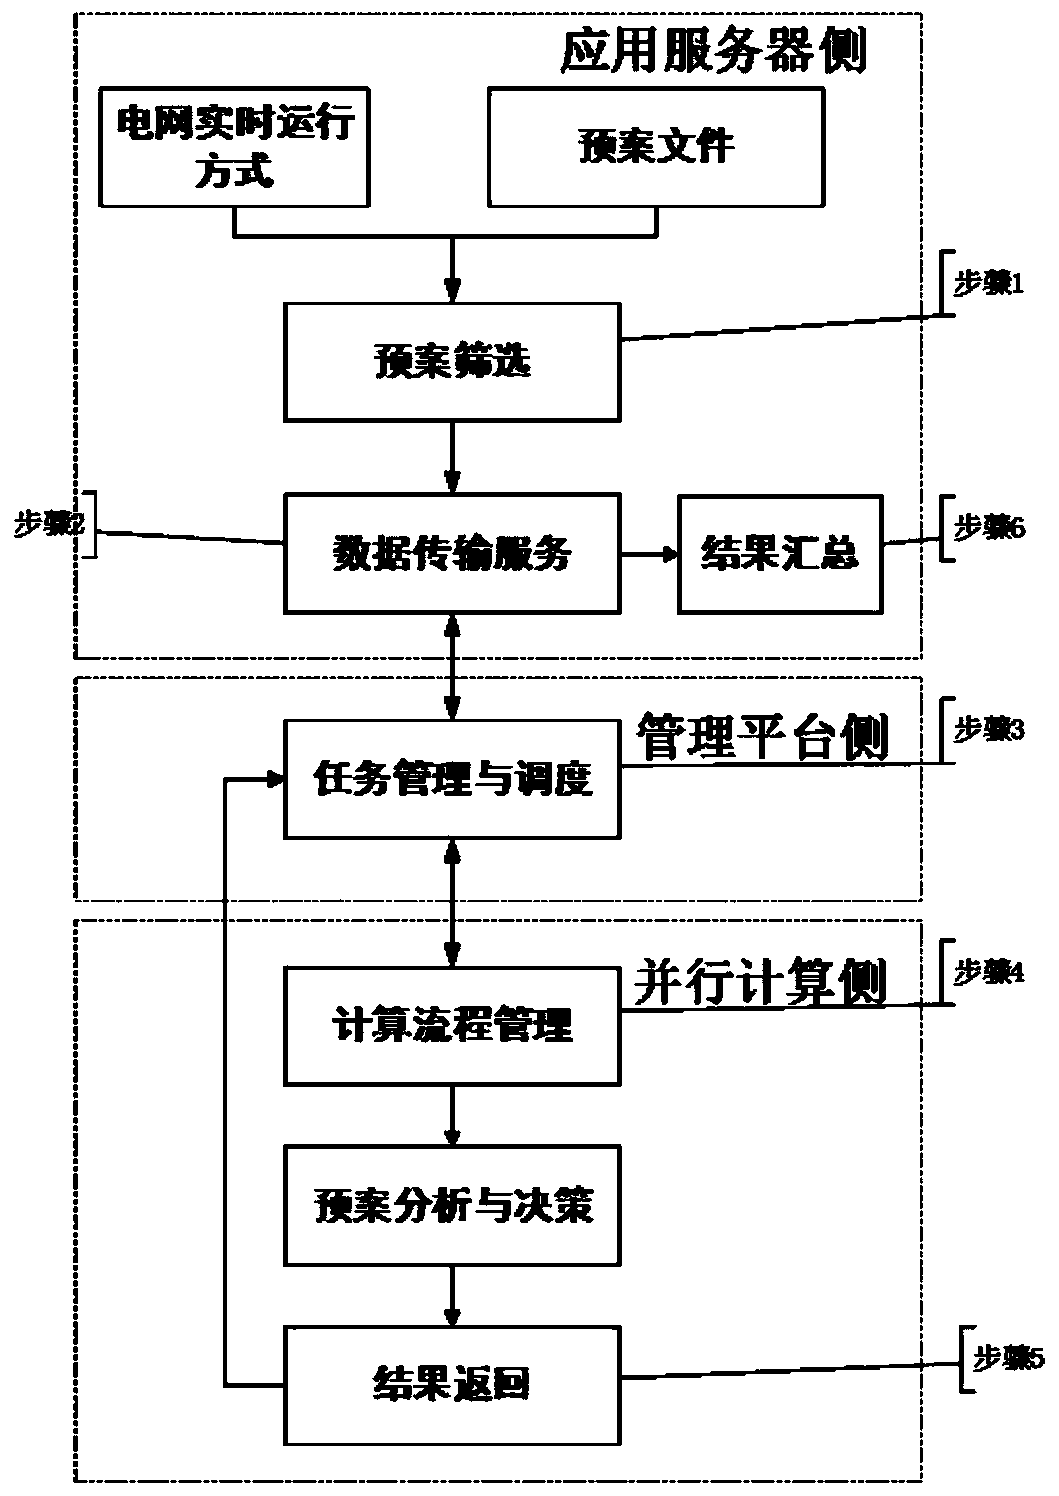 Fault handling plan online checking parallel computing method and system